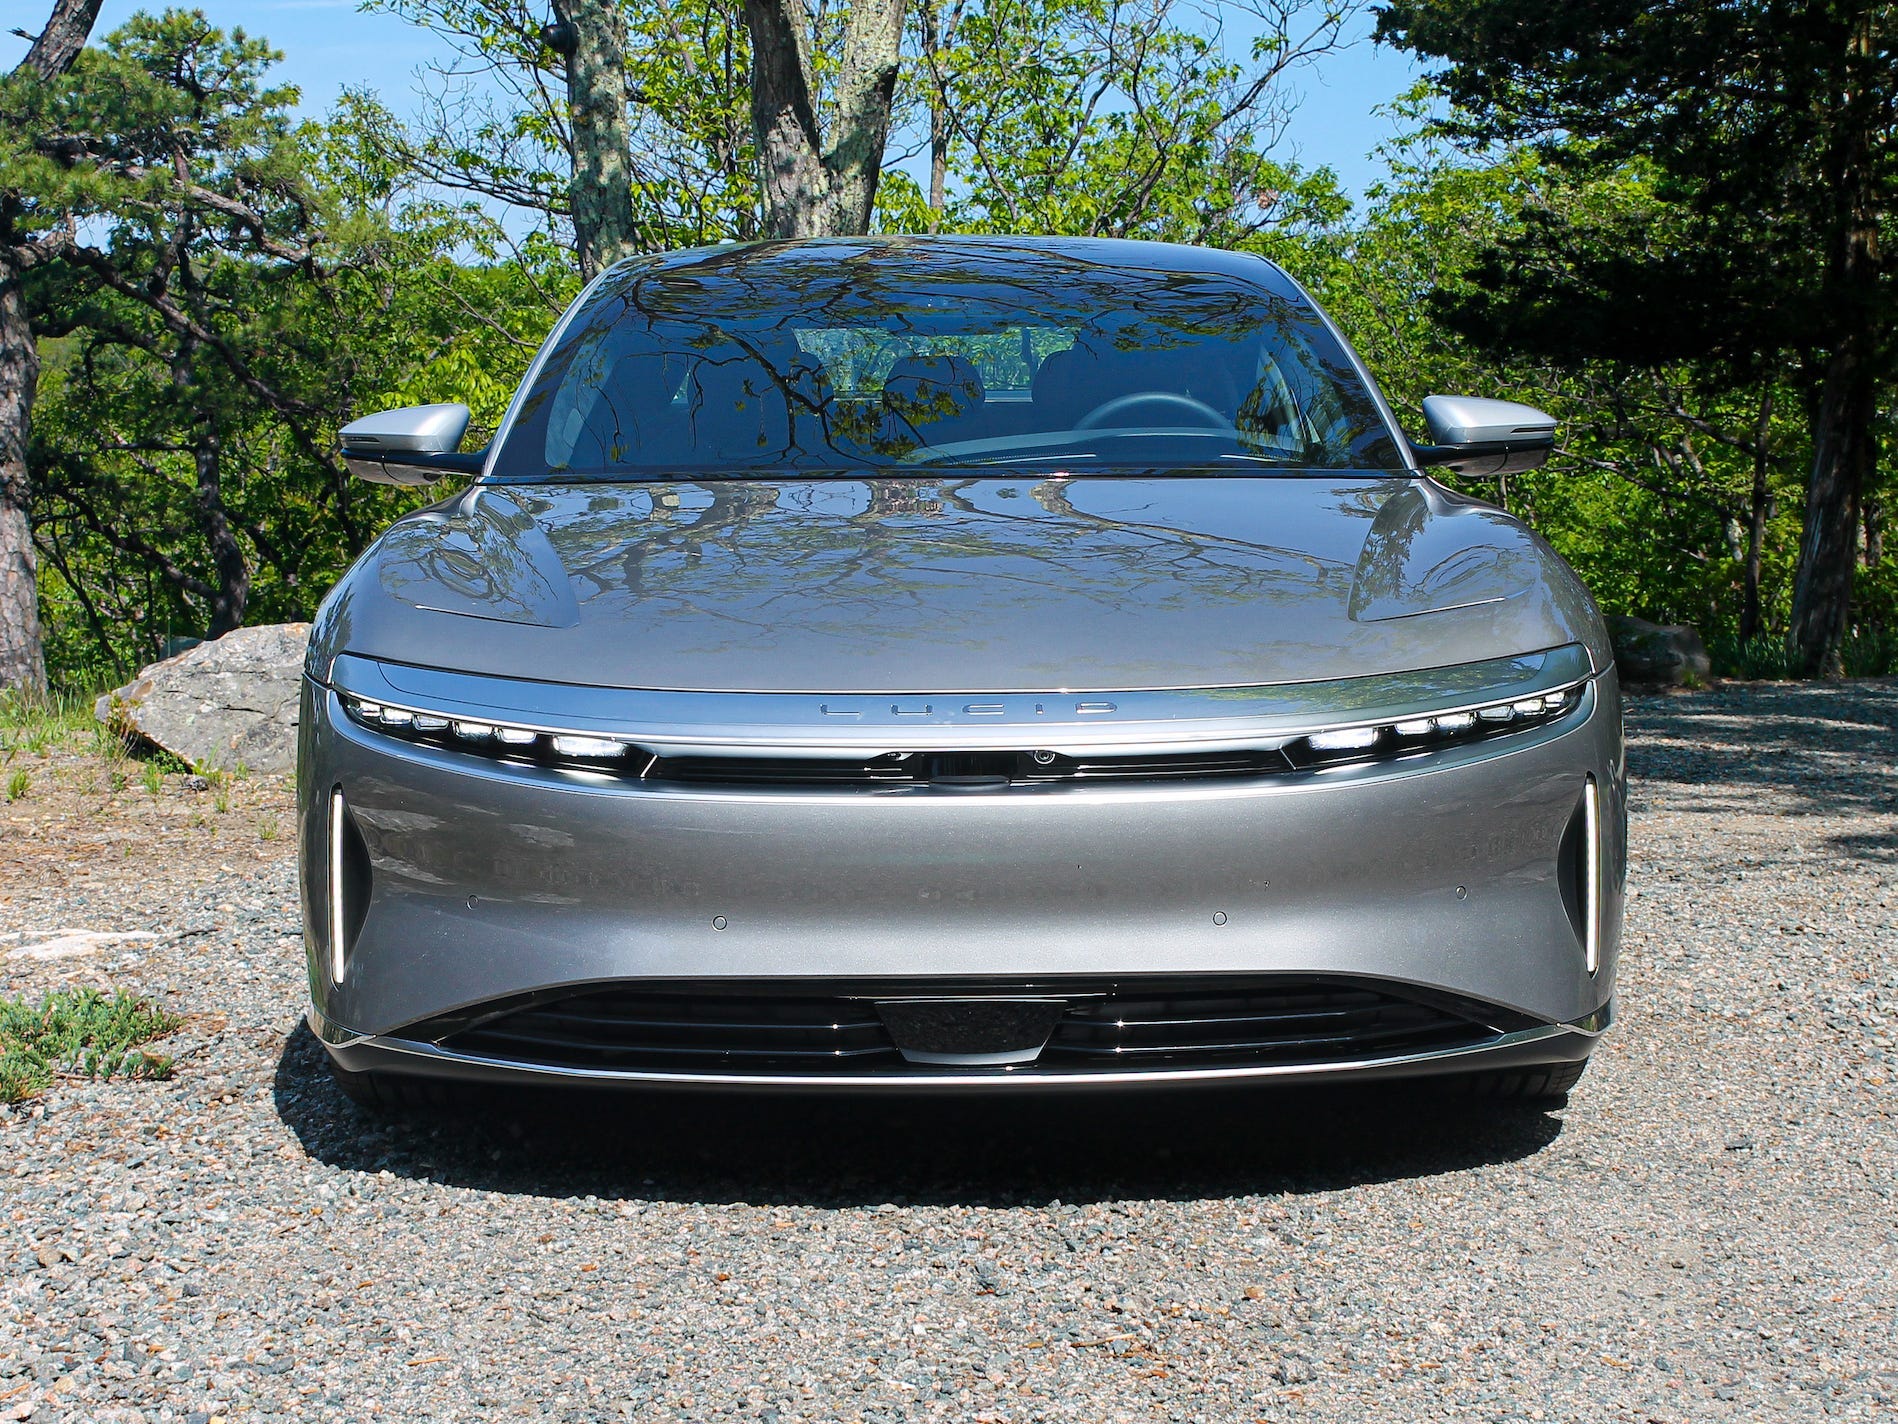 The Lucid Air Grand Touring Performance.